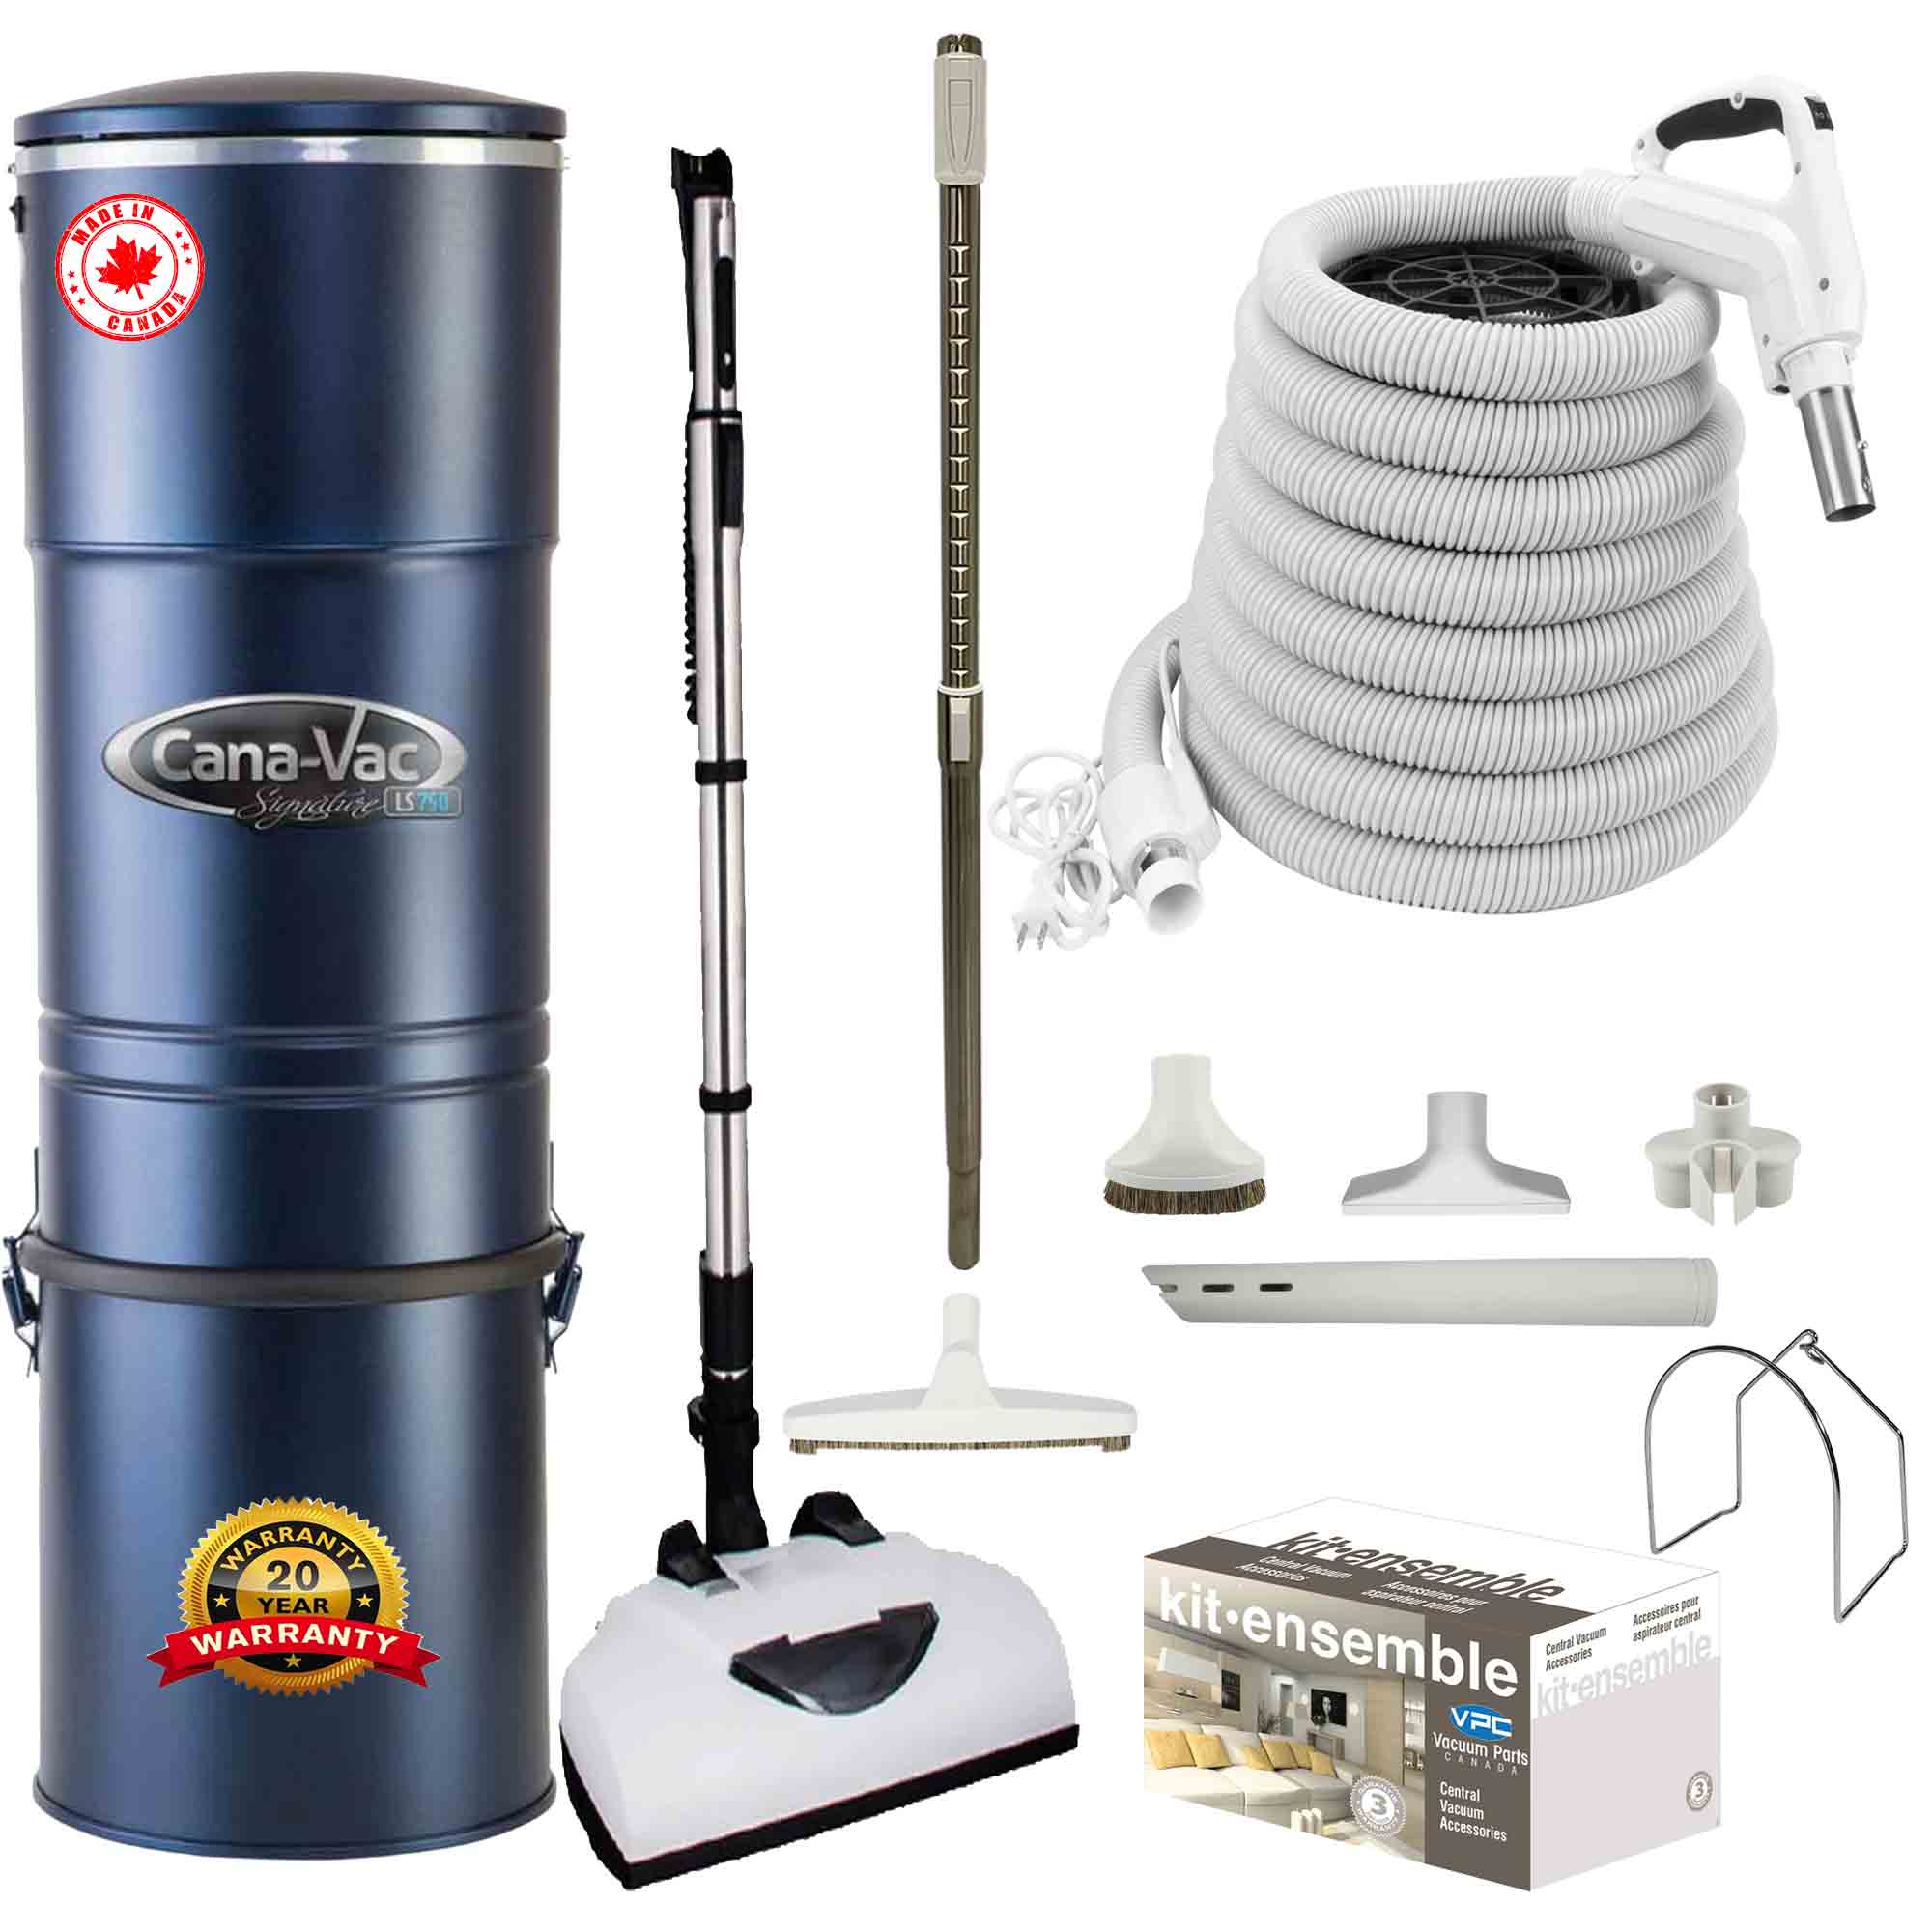 Cana-Vac LS790 Central Vacuum with Deluxe Electric Package (White)